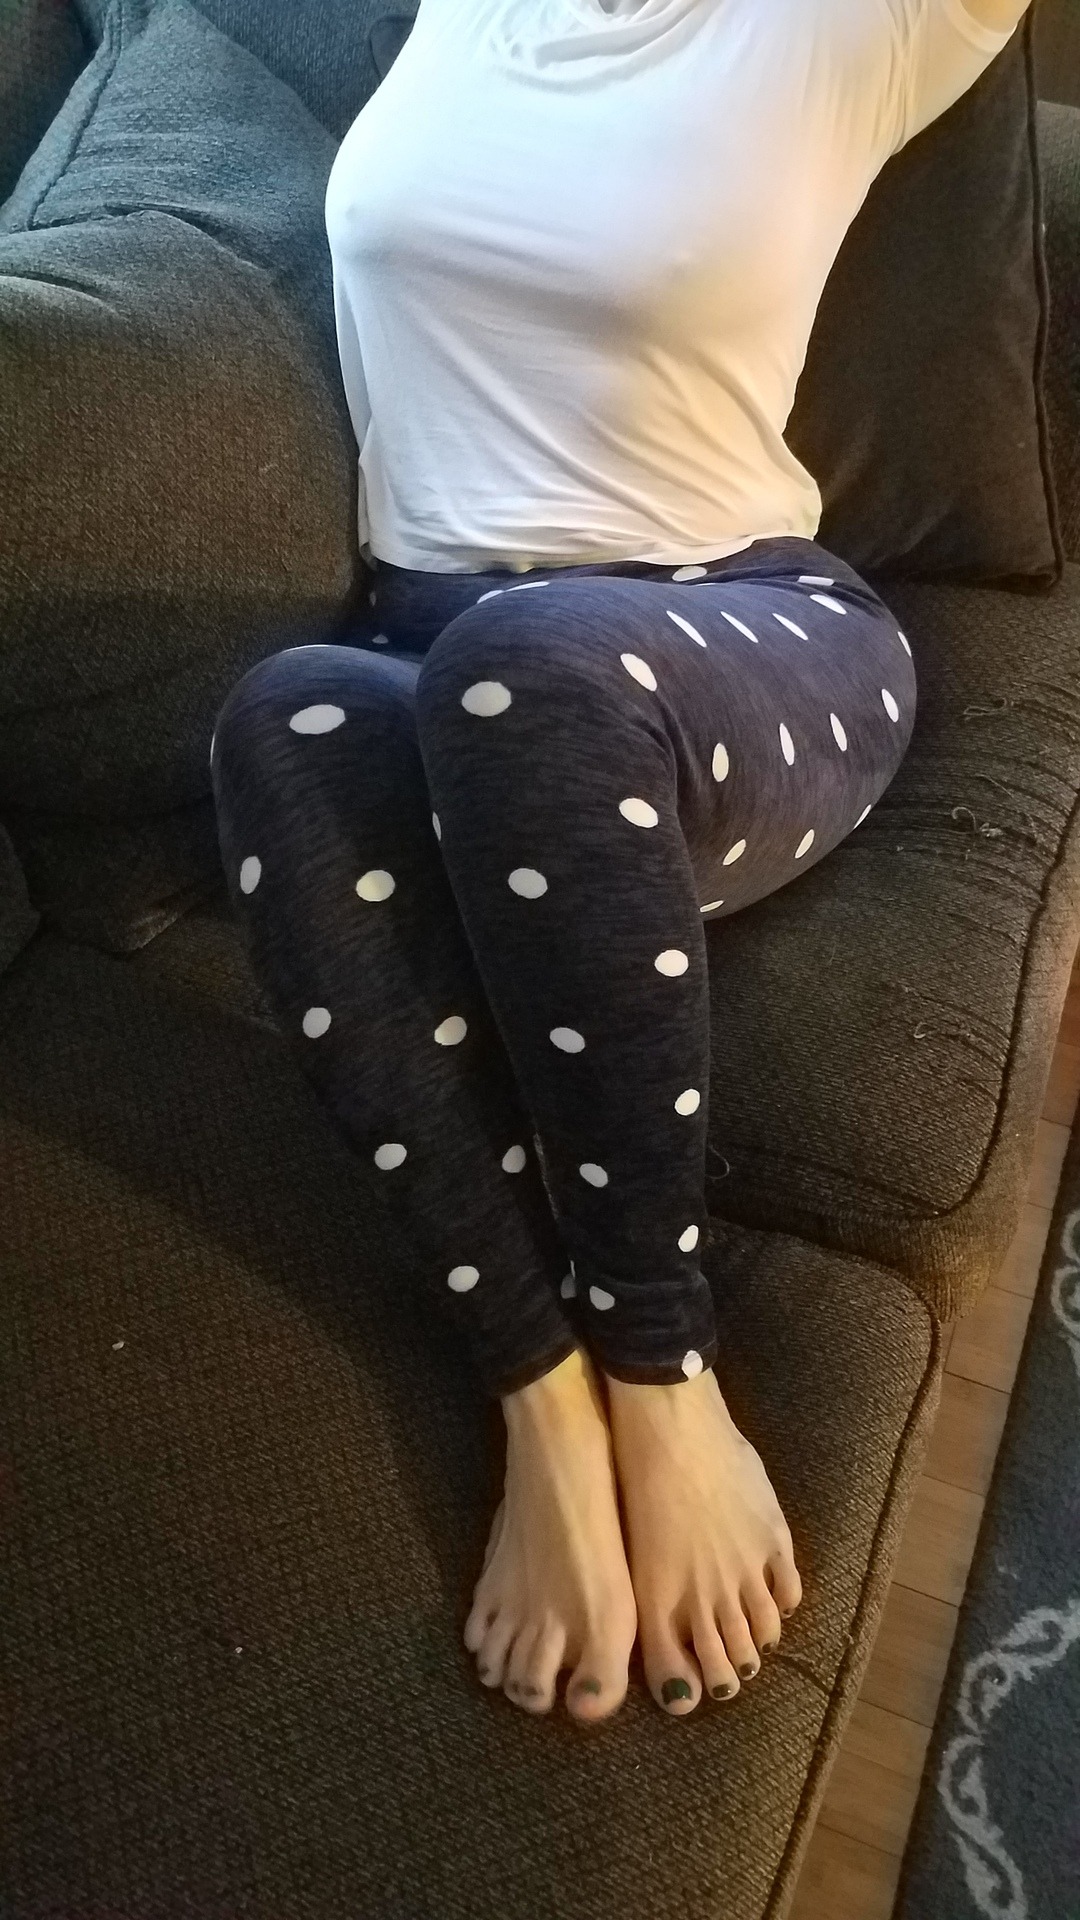 Candid Homemade And All Original Pics — My Pretty Wifes